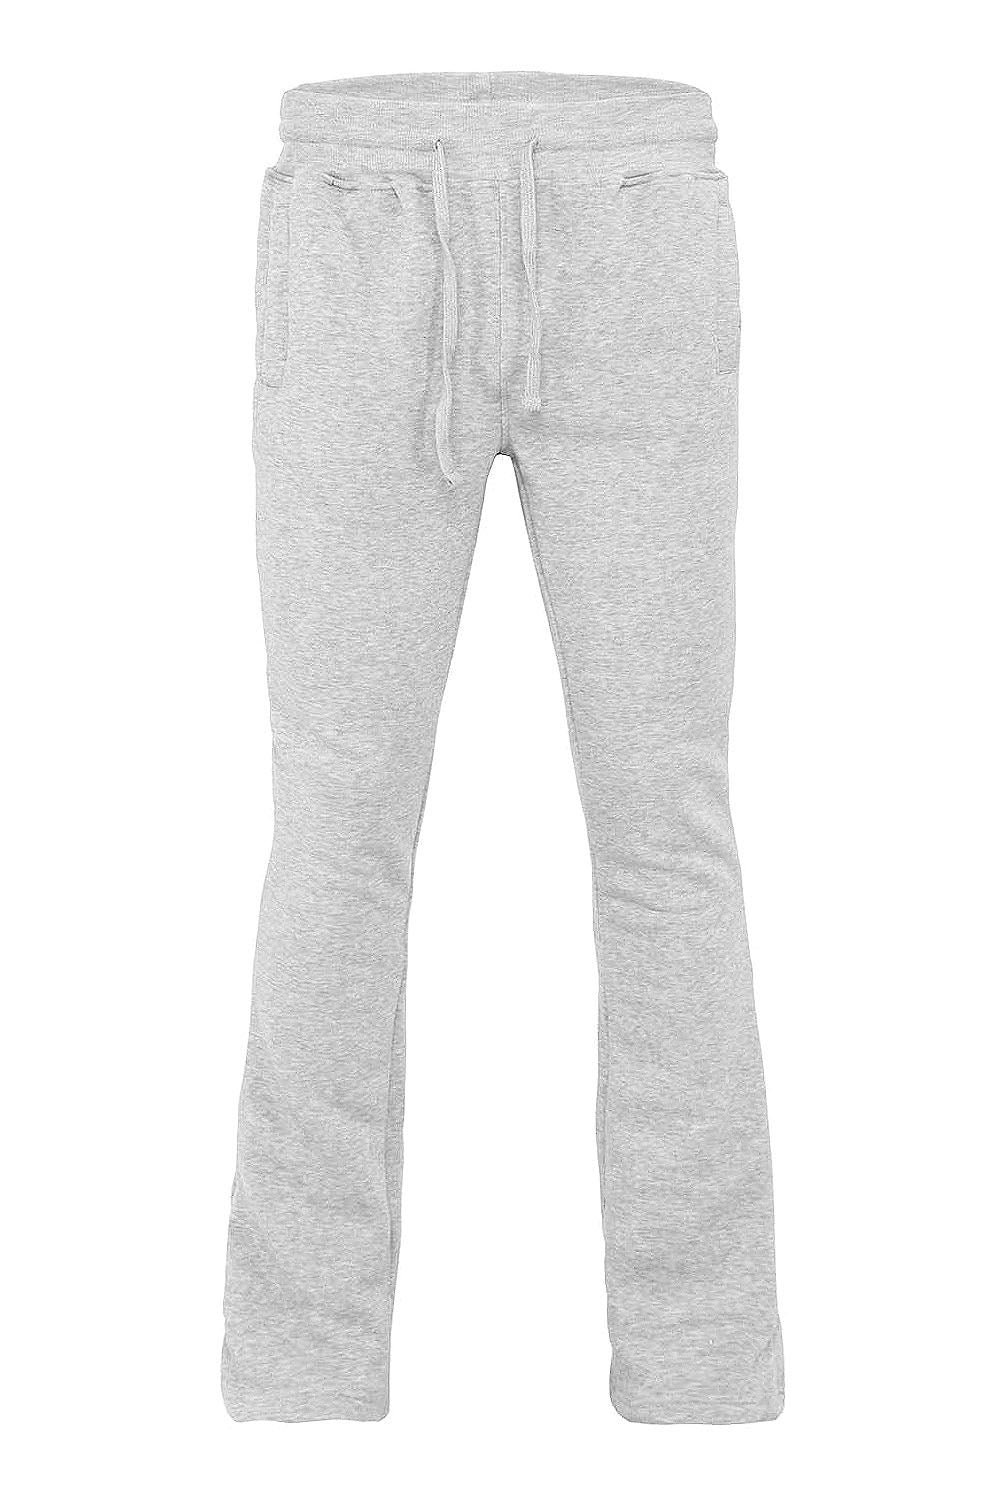 Stacked Sweatpants -  Canada